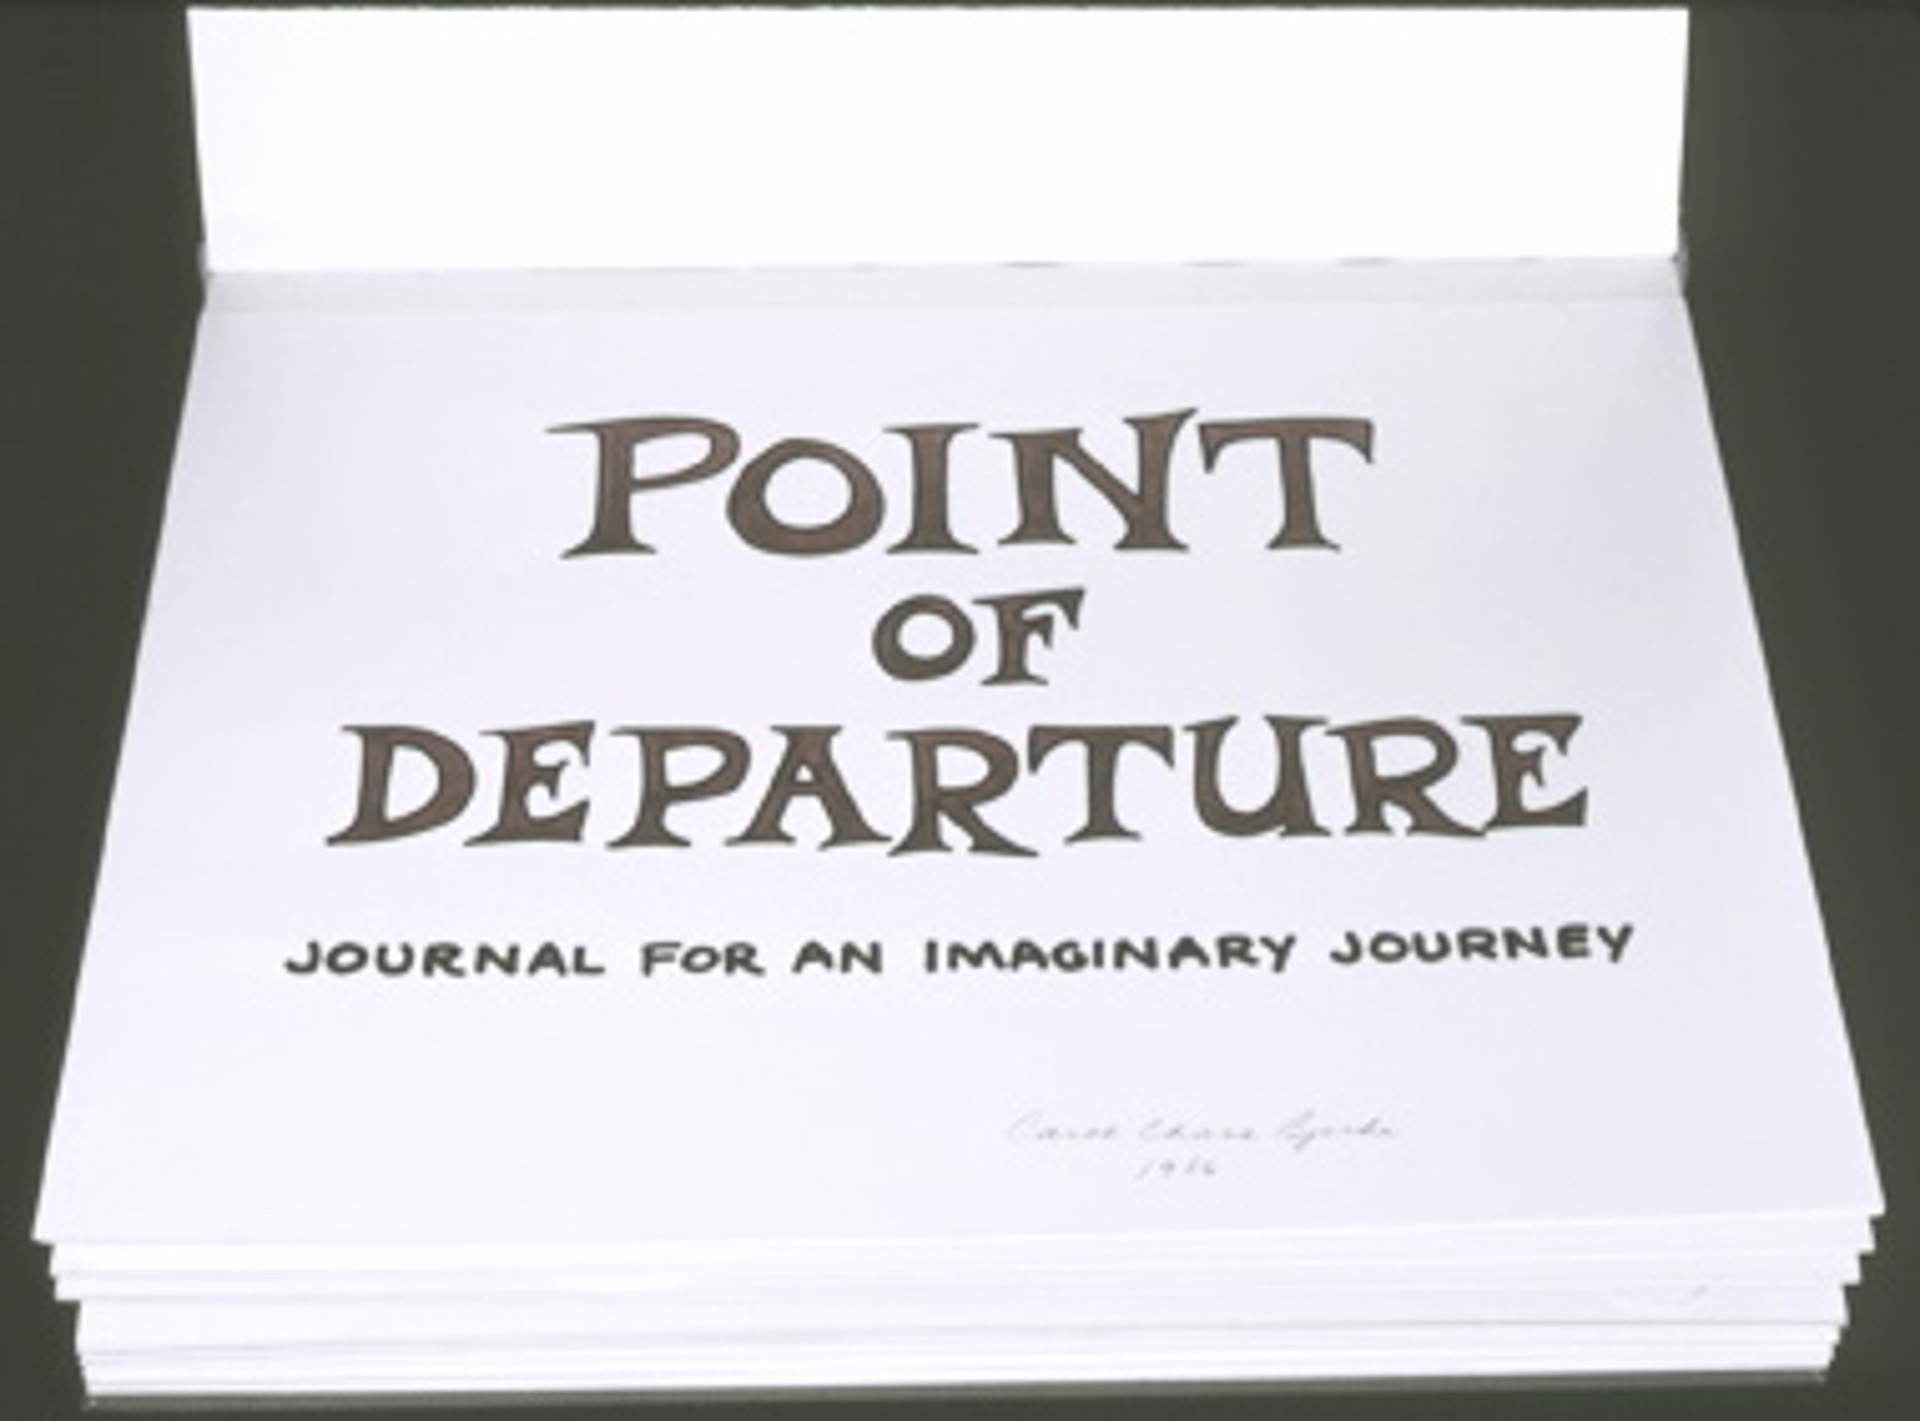 Points of Departure by Carol Chase Bjerke